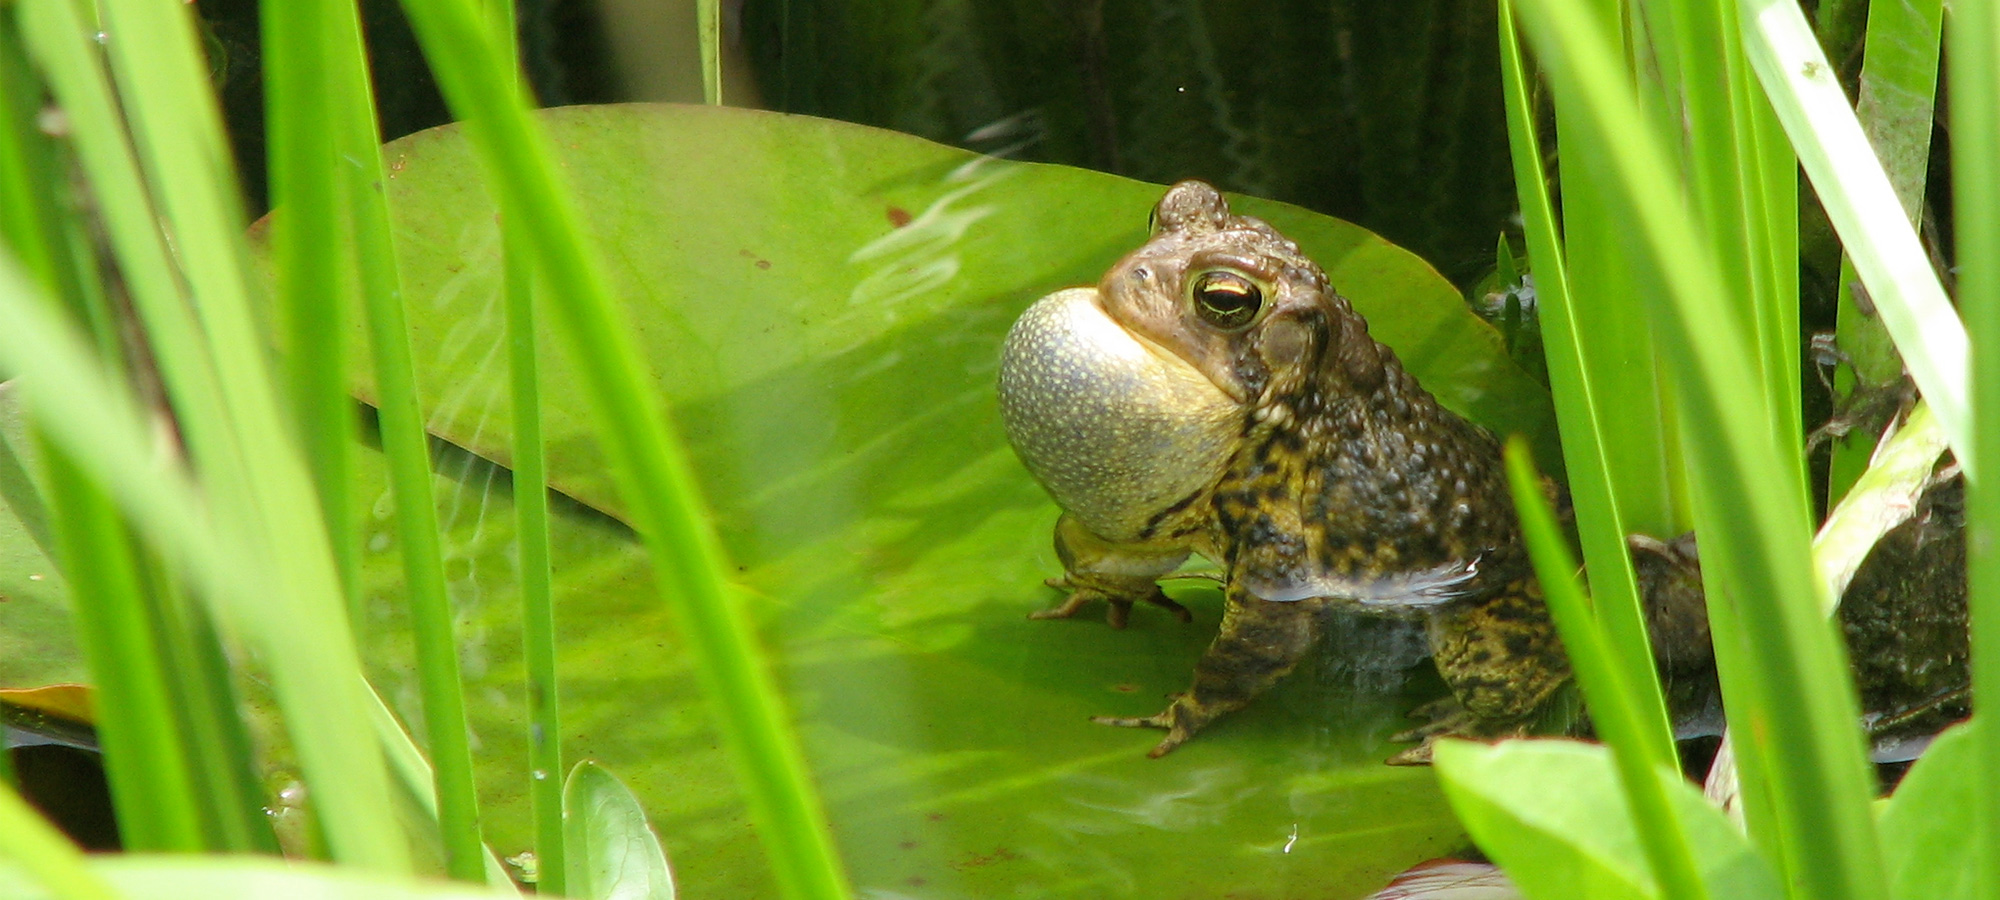 Toad singing on a lilypad